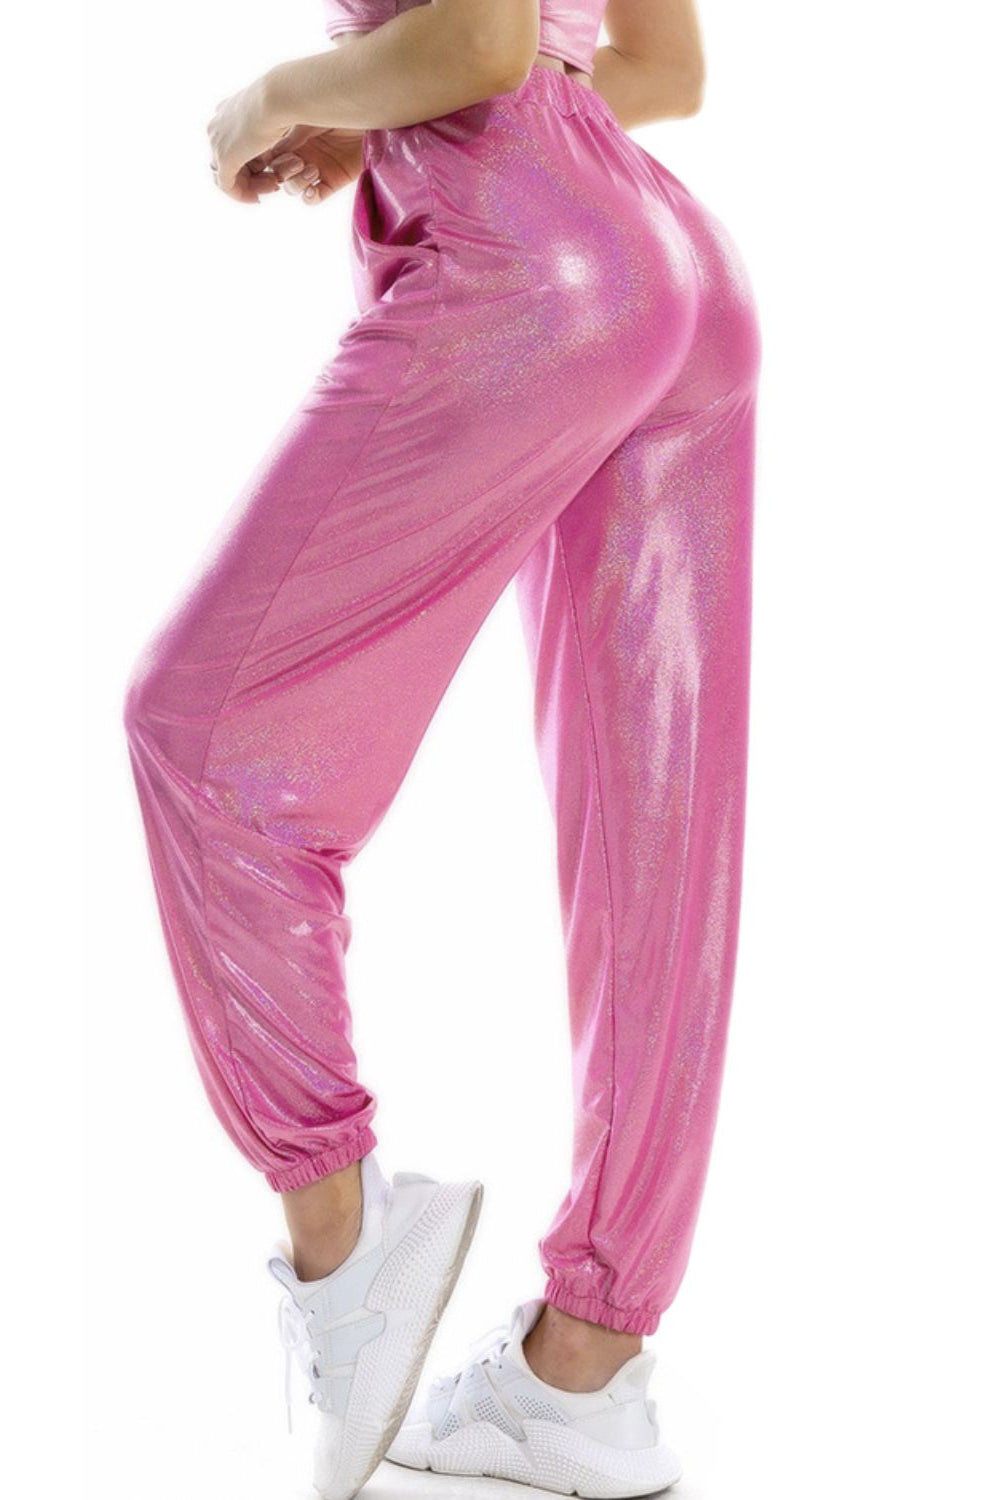 Pale Violet Red Golden Days Glitter Elastic Waist Pants with Pockets Pants